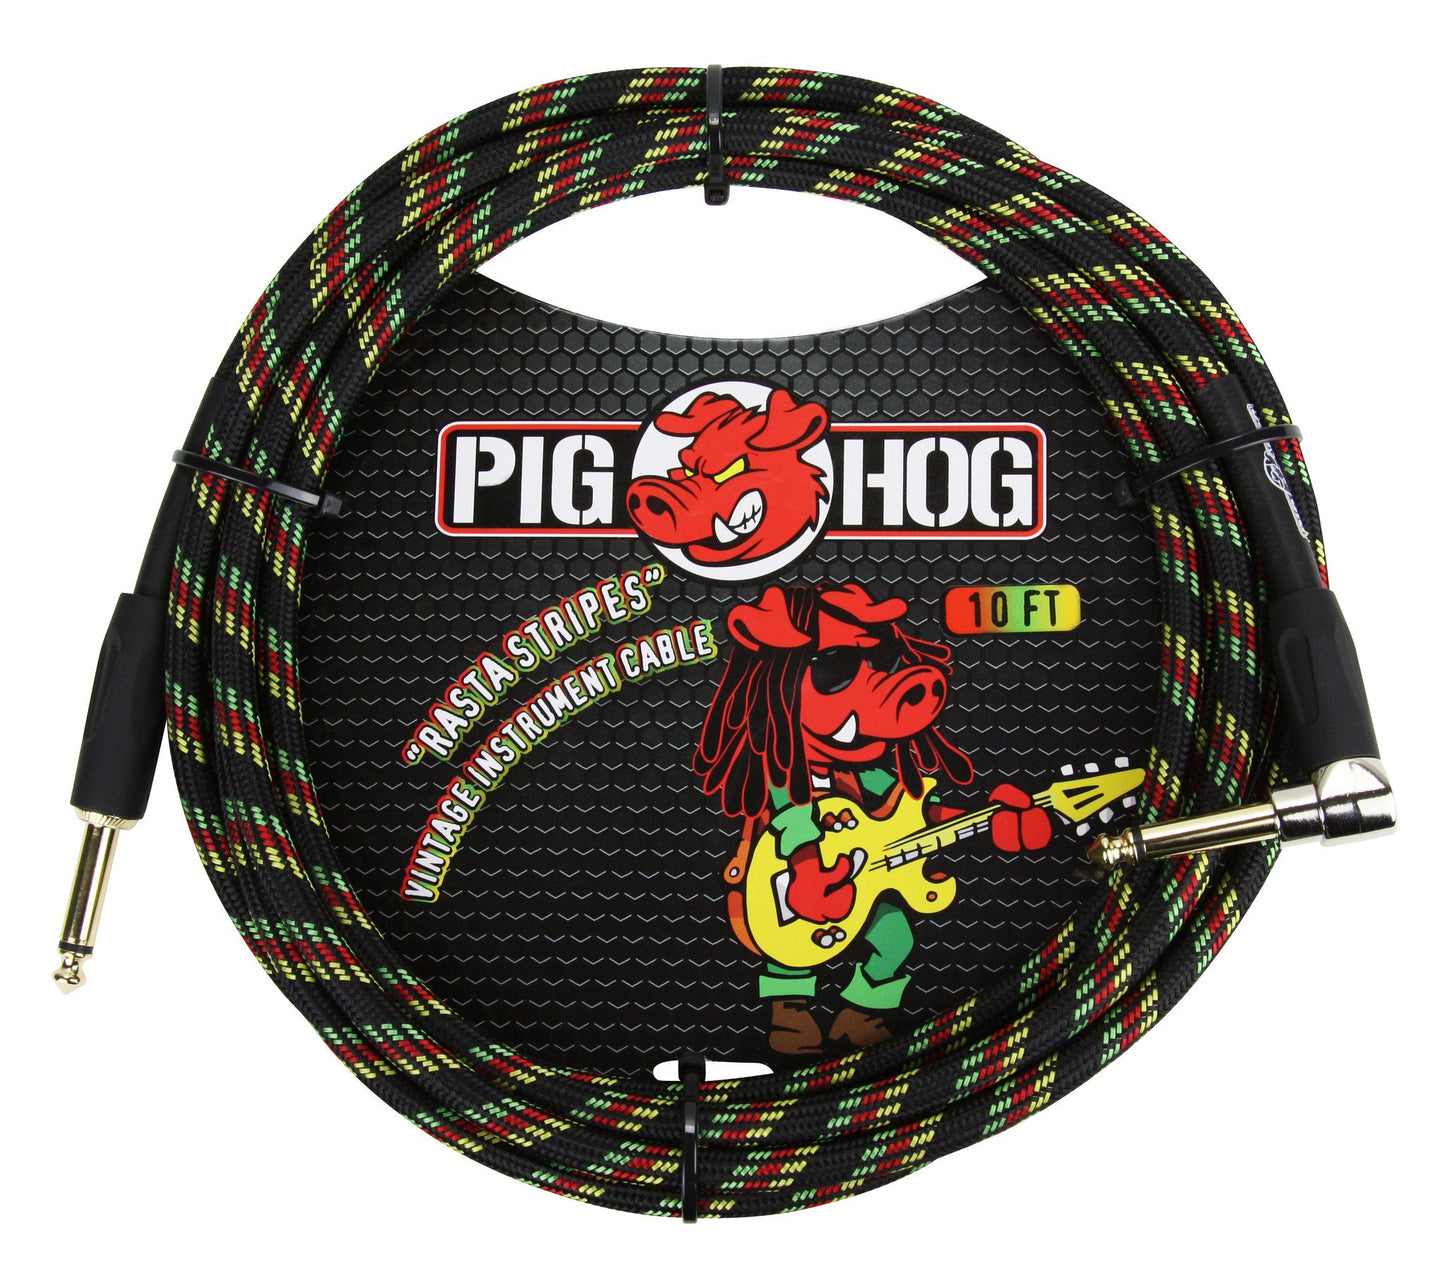 Pig Hog PCH10RAR Instrument Cable, 1/4" Straight to 1/4" Right Angle, Rasta Stripe Woven, 10"ft